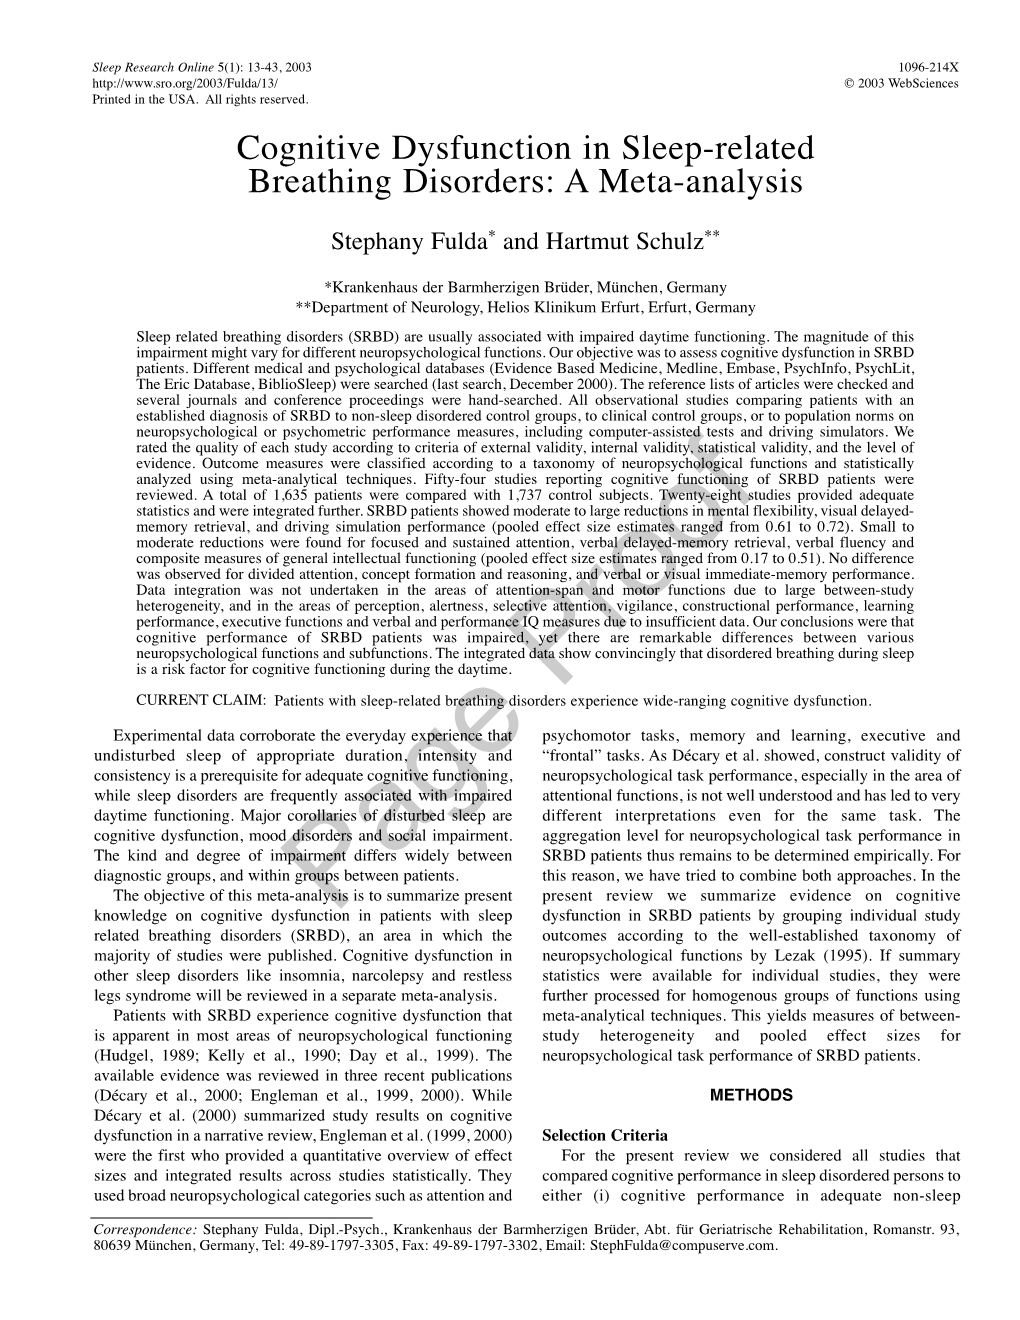 Cognitive Dysfunction in Sleep-Related Breathing Disorders: a Meta-Analysis